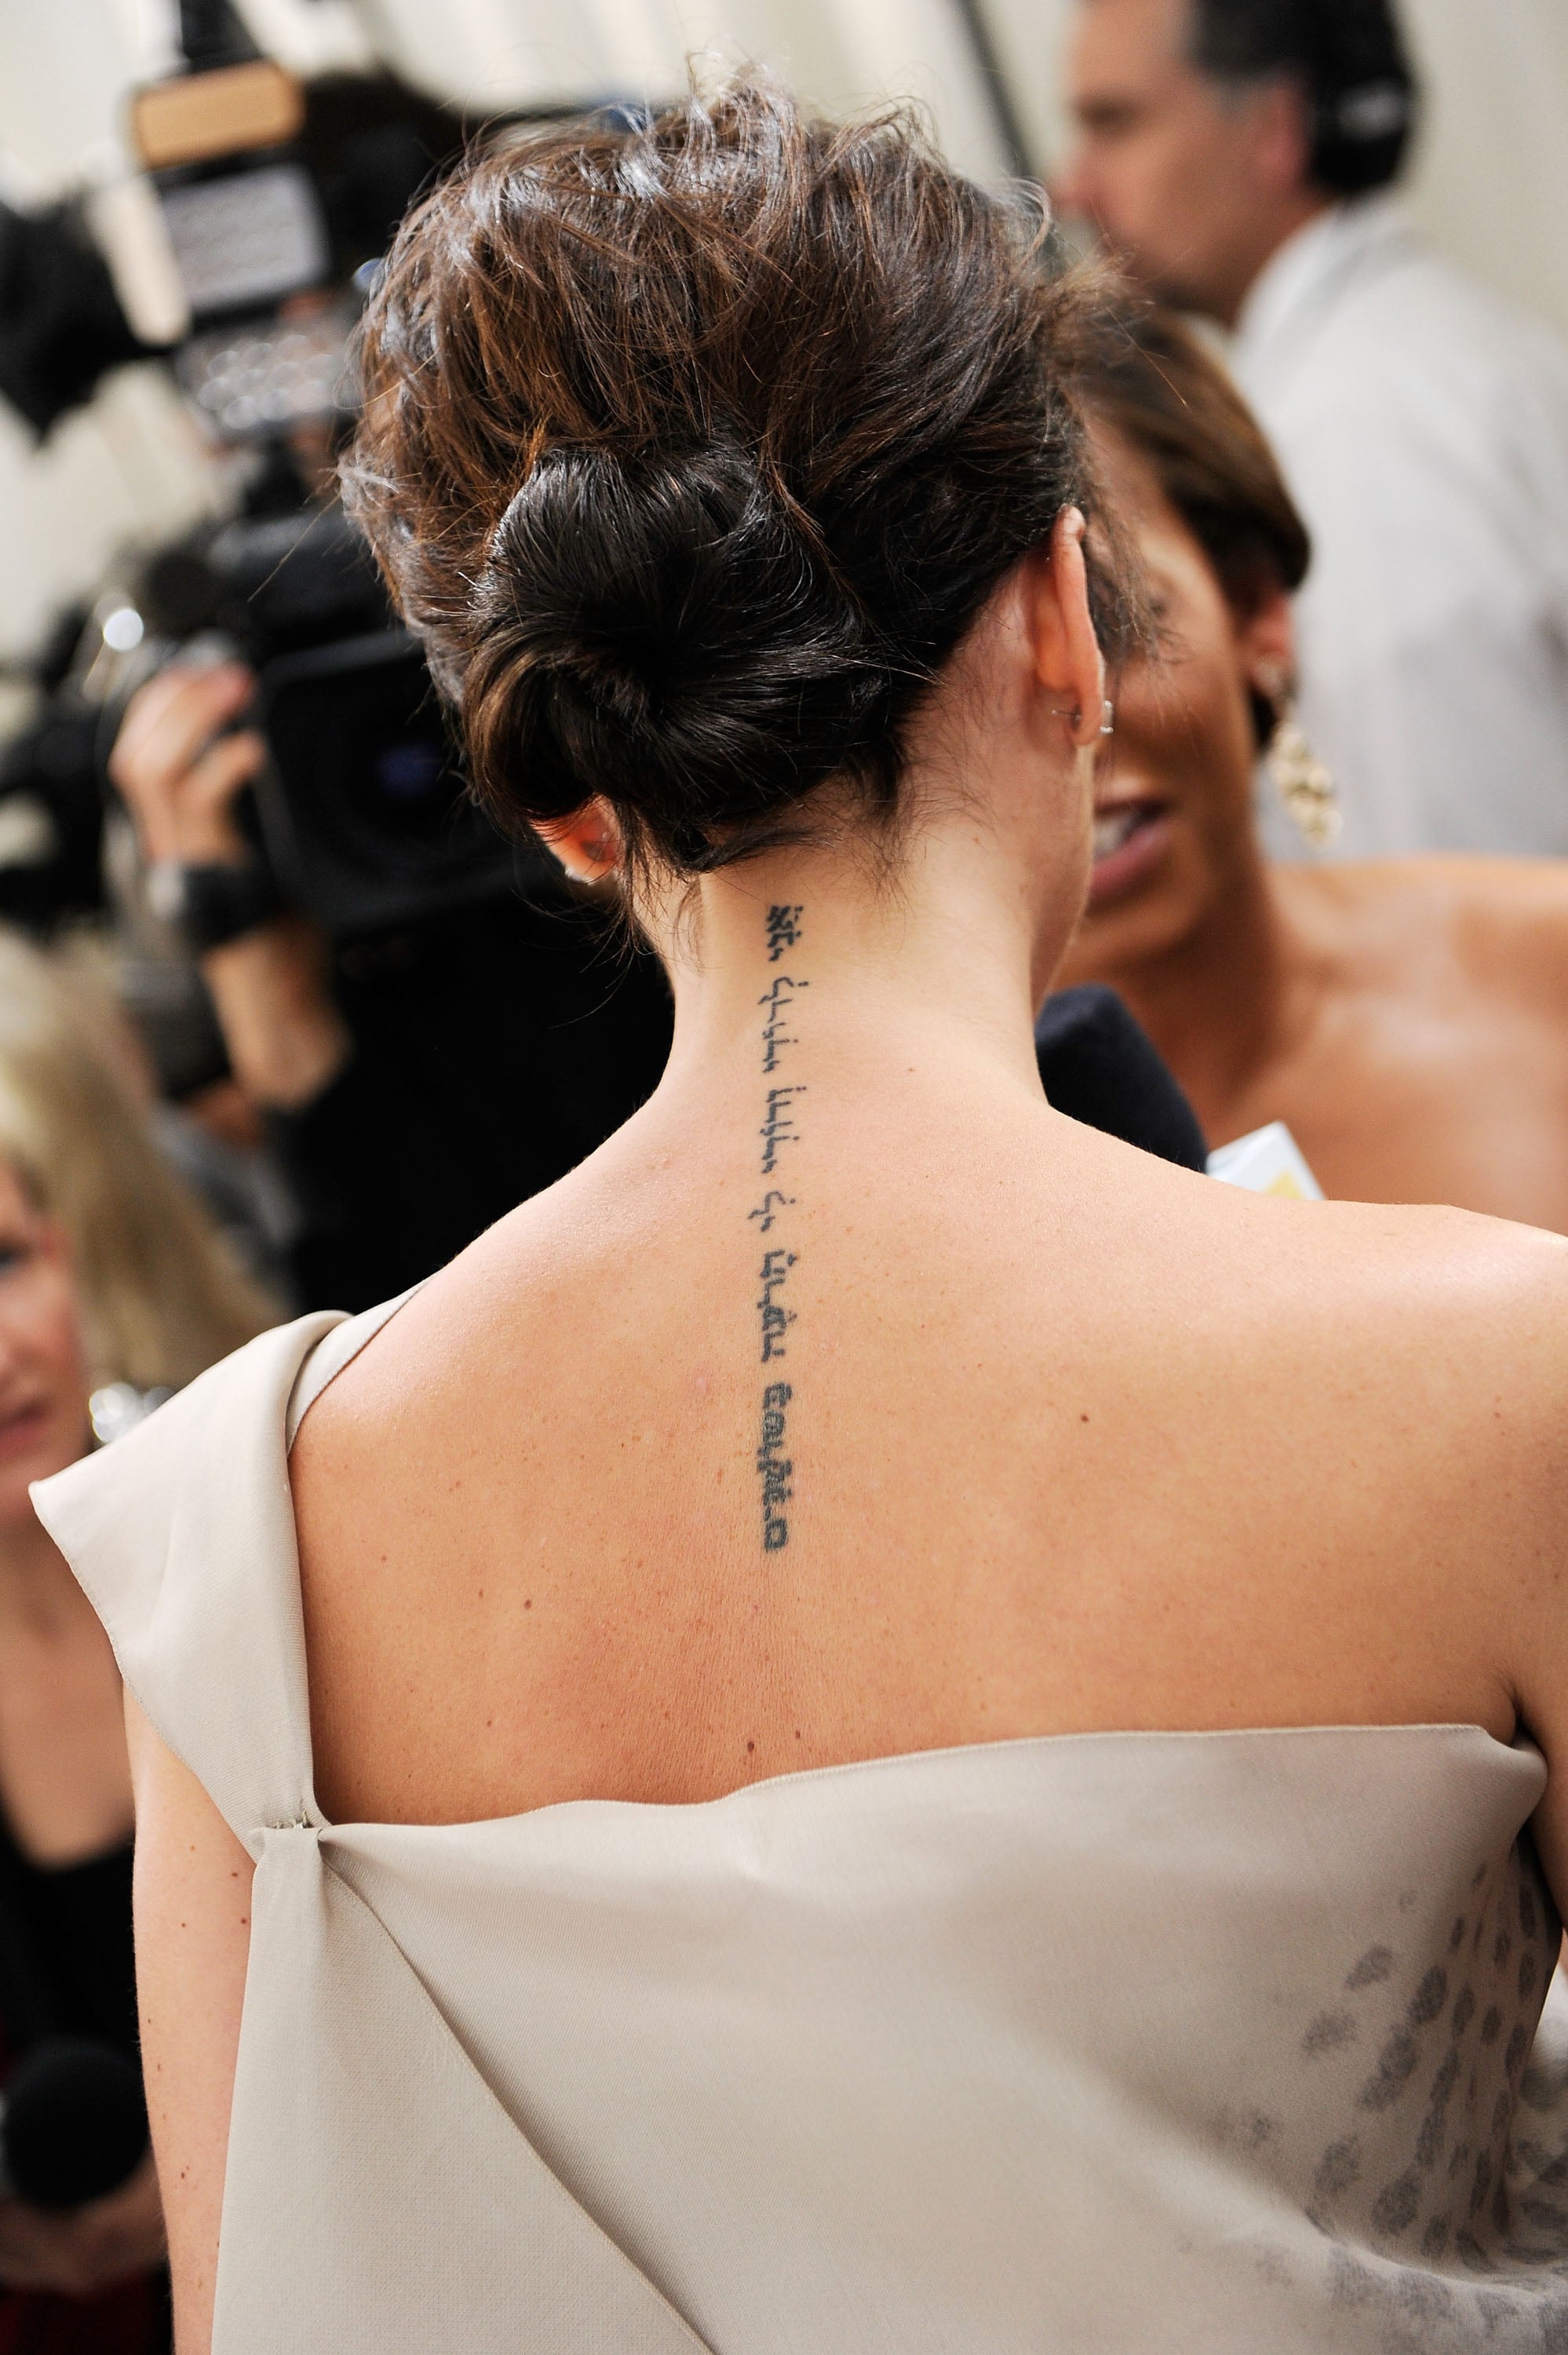 Victoria Beckham reveals tattoo dedicated to husband David is almost gone  as she stuns in a backless jumpsuit at Breast Cancer Research Foundation  bash  The Sun